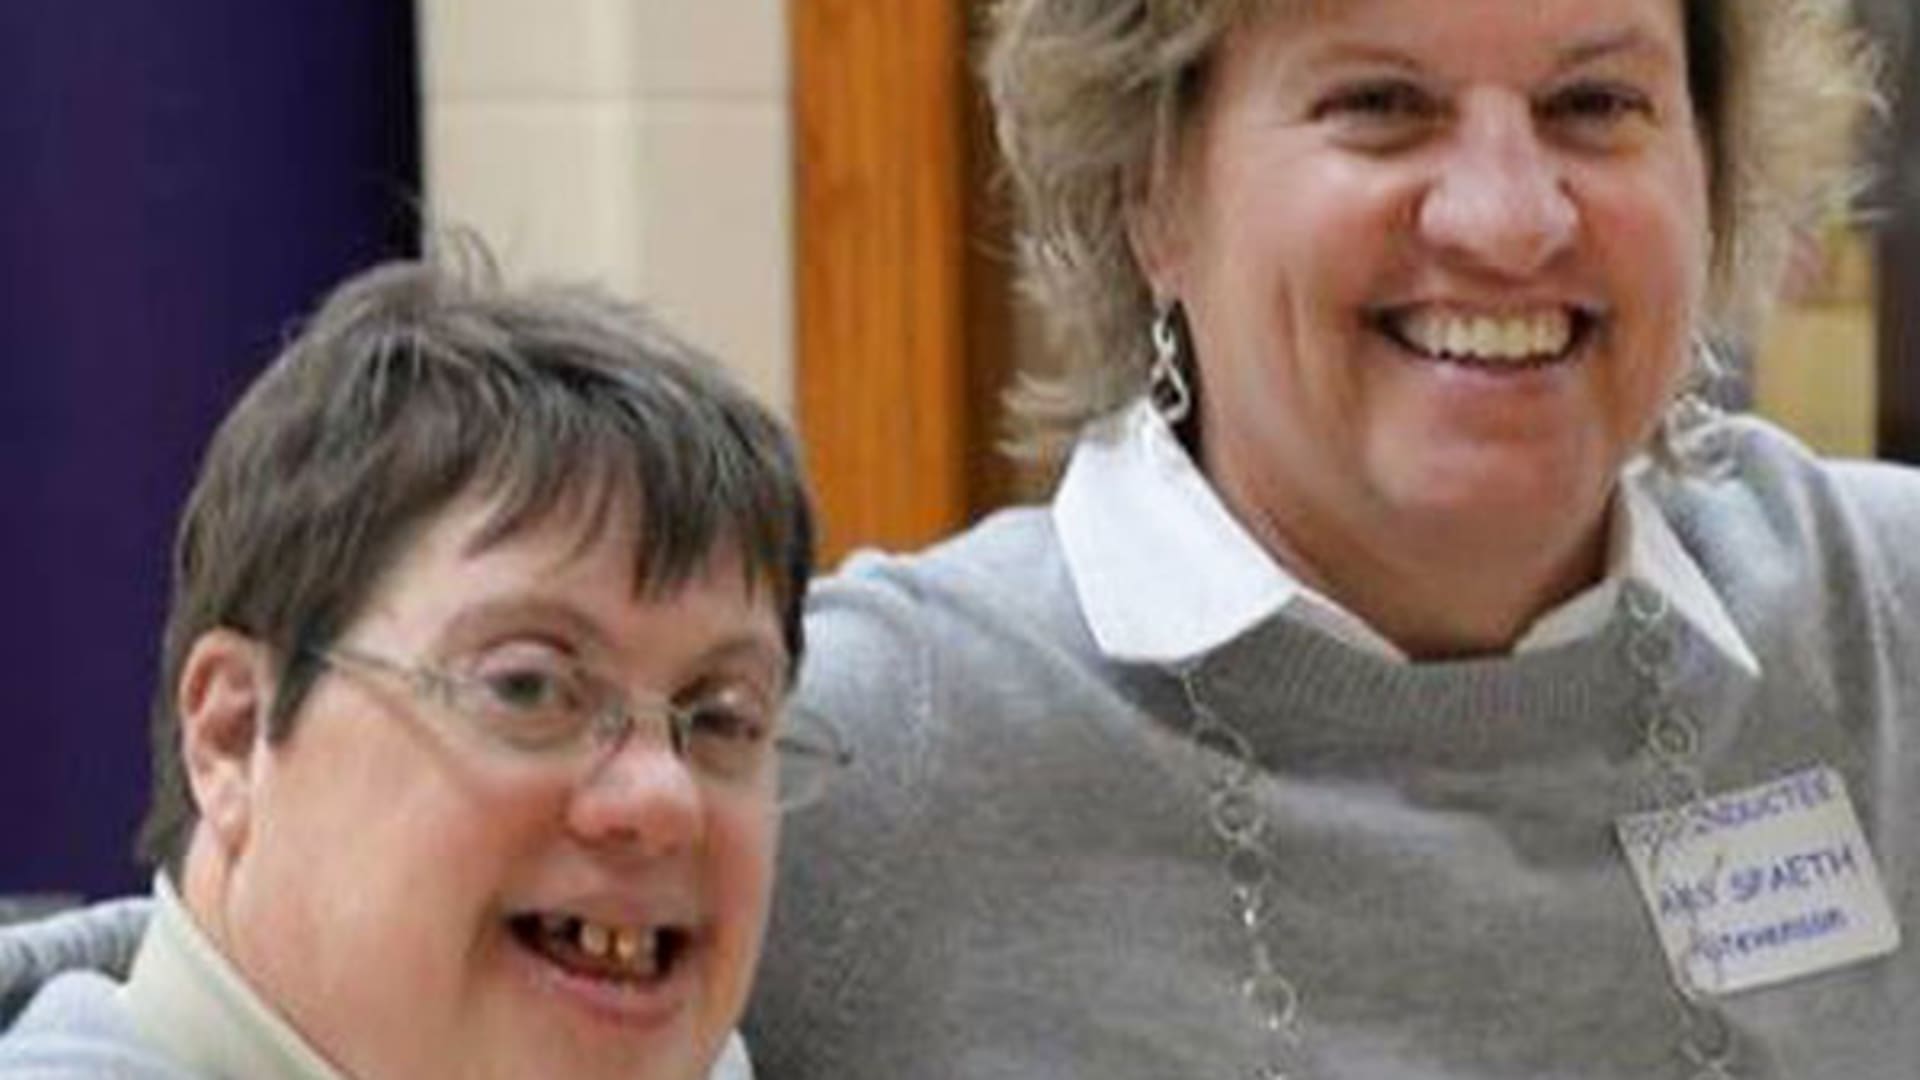 Judge rejects Walmart’s request for new trial after firing of employee with Down syndrome – CNBC